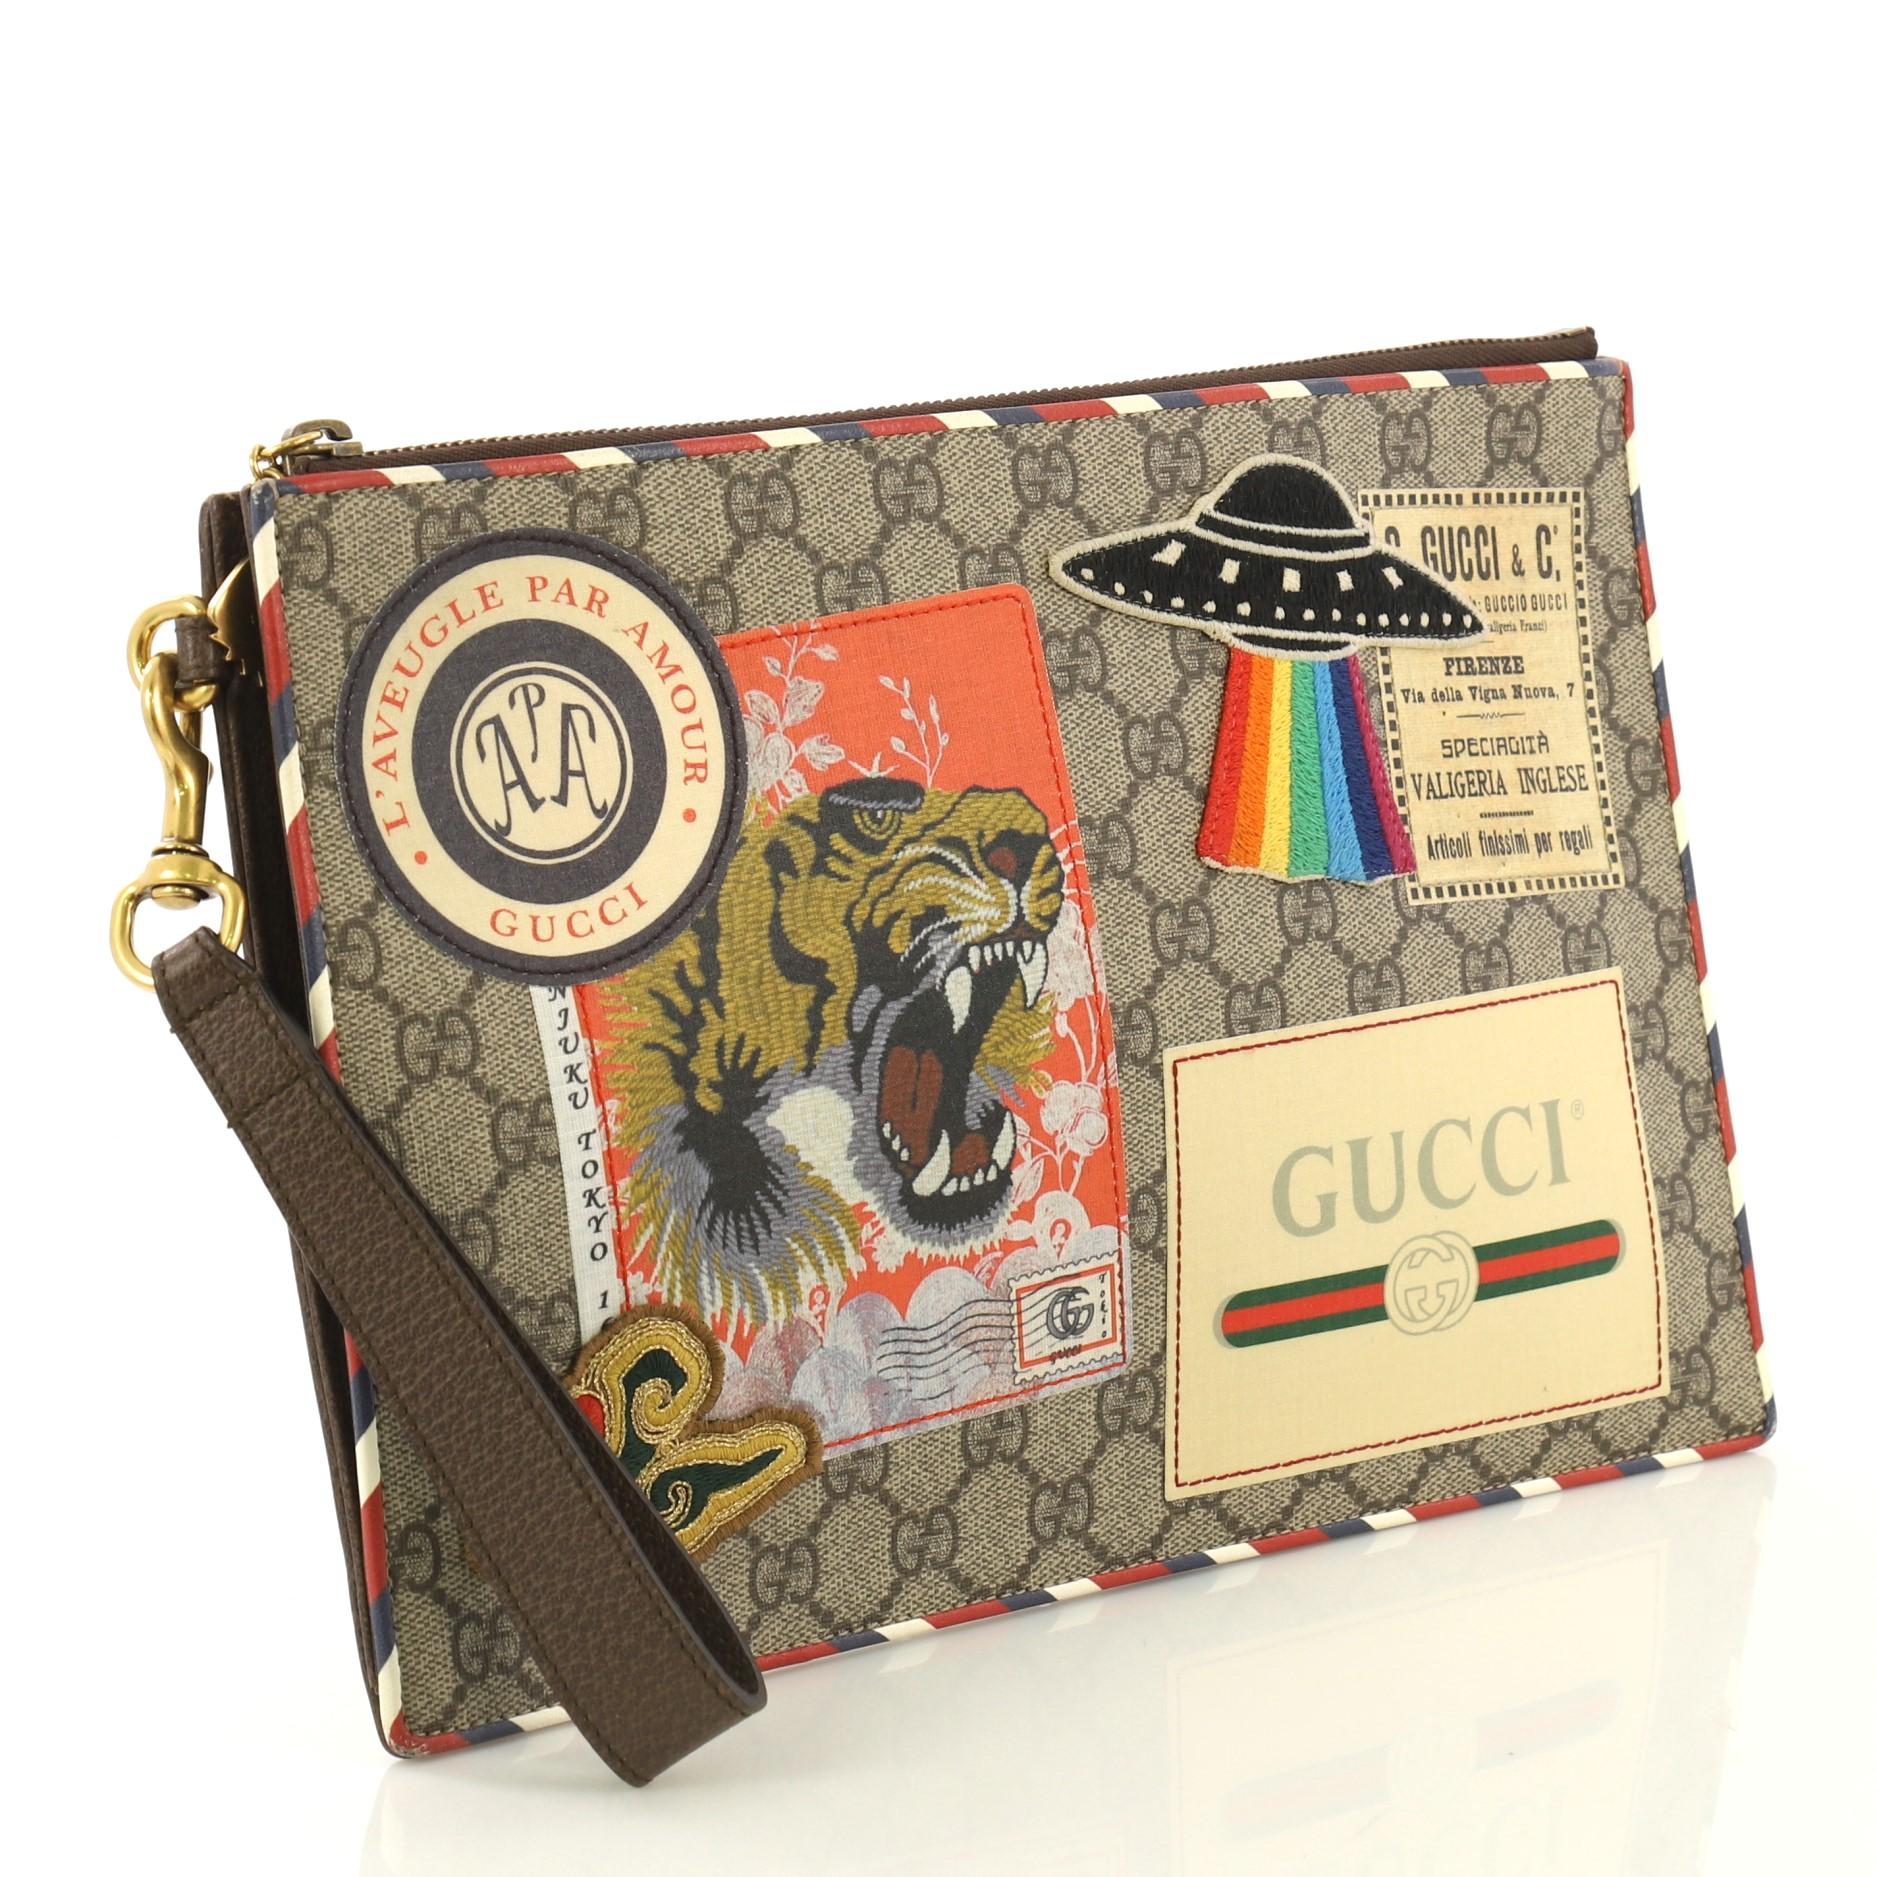 This Gucci Courrier Pouch GG Coated Canvas with Applique, crafted in light brown coated canvas, features a hand strap, applique design, and gold-tone hardware. Its zip closure opens to a beige canvas interior with multiple card slots. 

Estimated